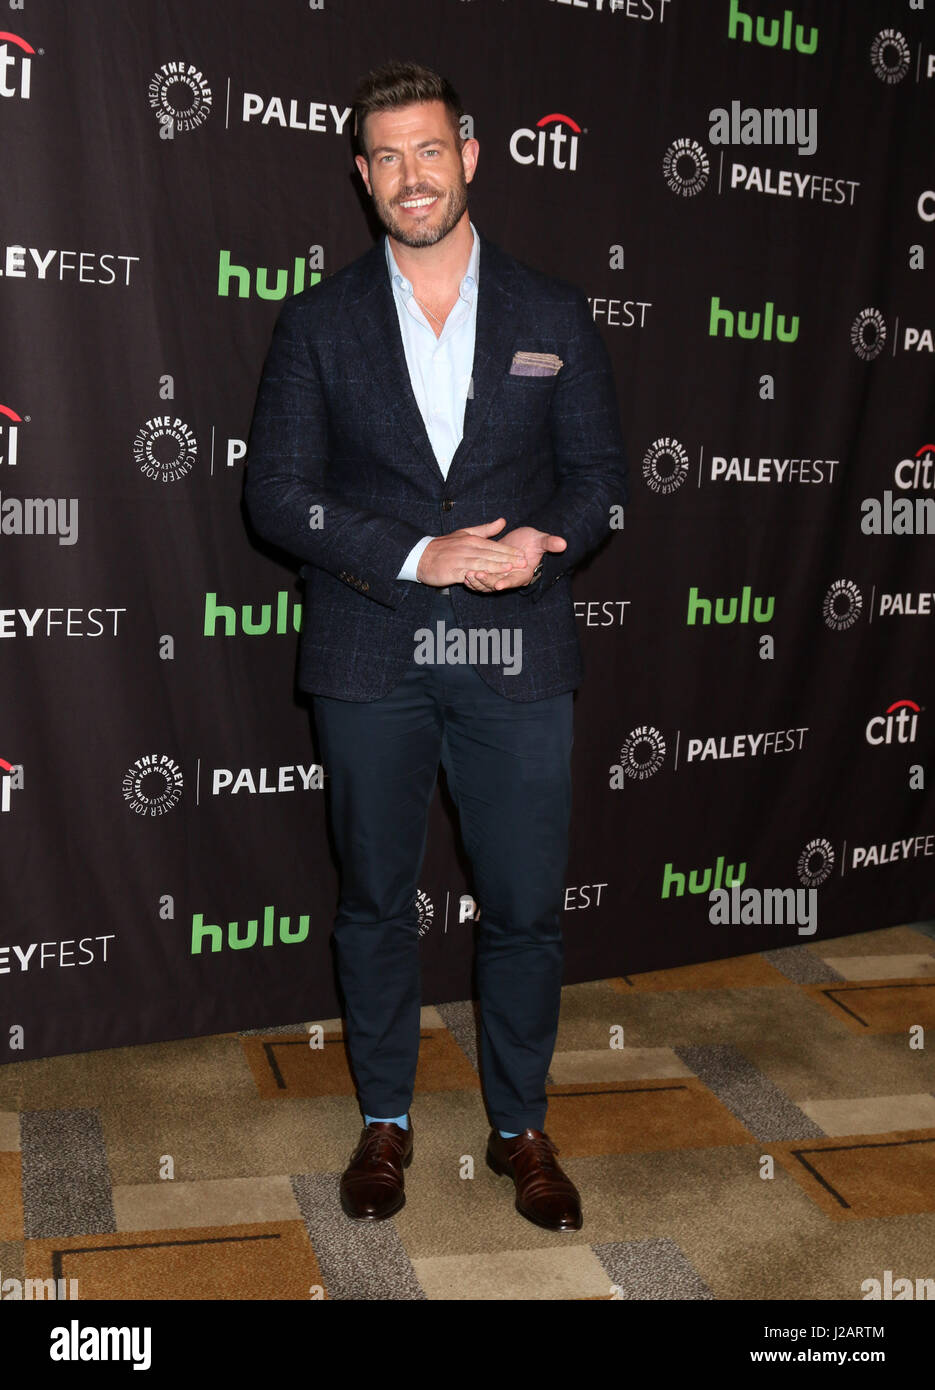 PaleyFest Los Angeles 2017 - 'Scandal' screening  Featuring: Jesse Palmer Where: Los Angeles, California, United States When: 26 Mar 2017 Credit: Nicky Nelson/WENN.com Stock Photo